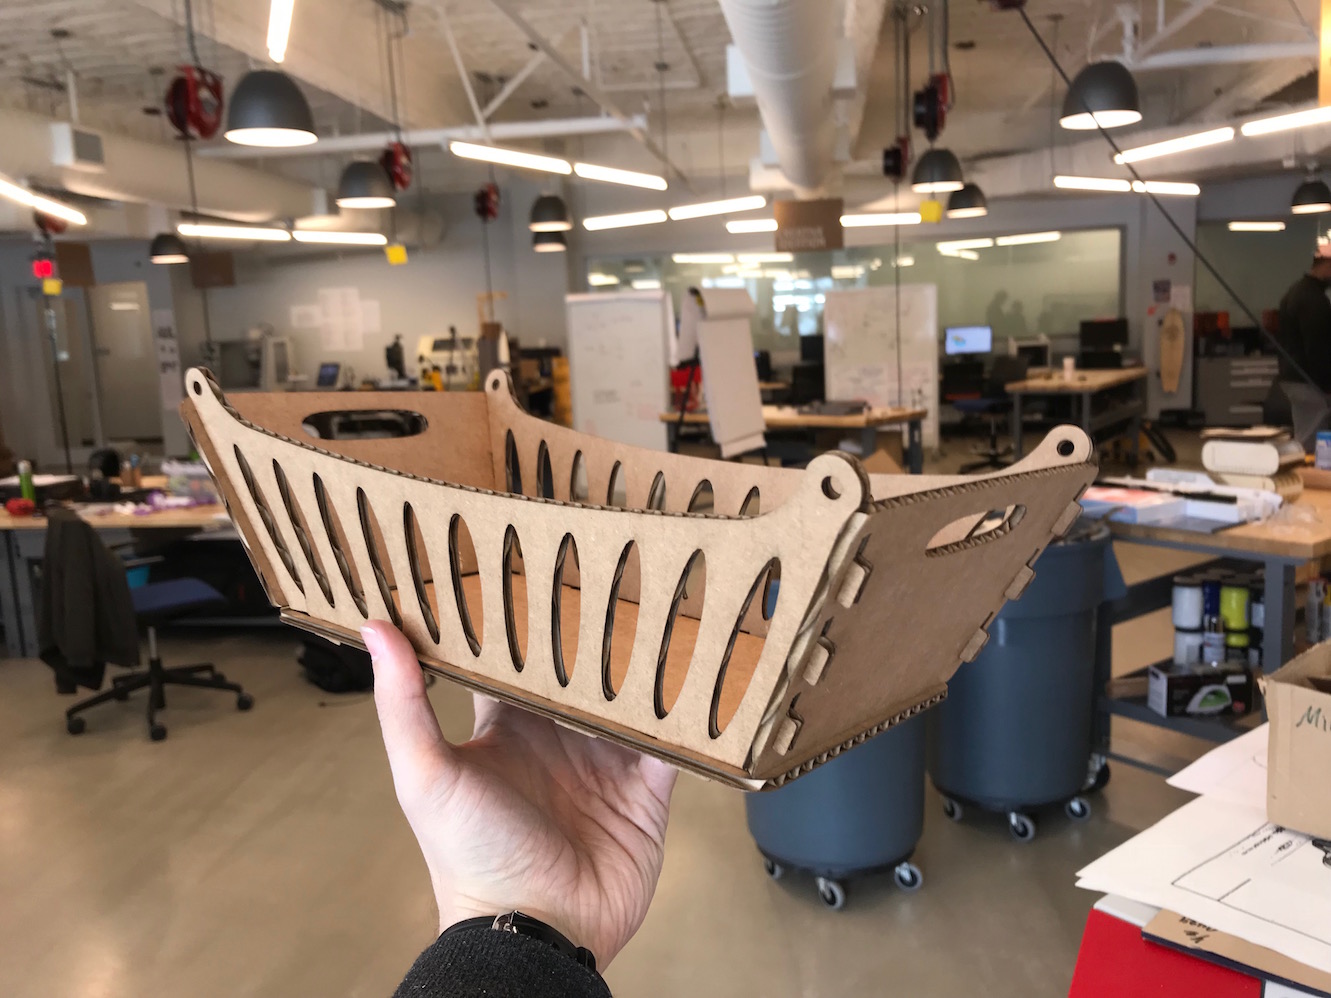 another view of the assembled cardboard cradle